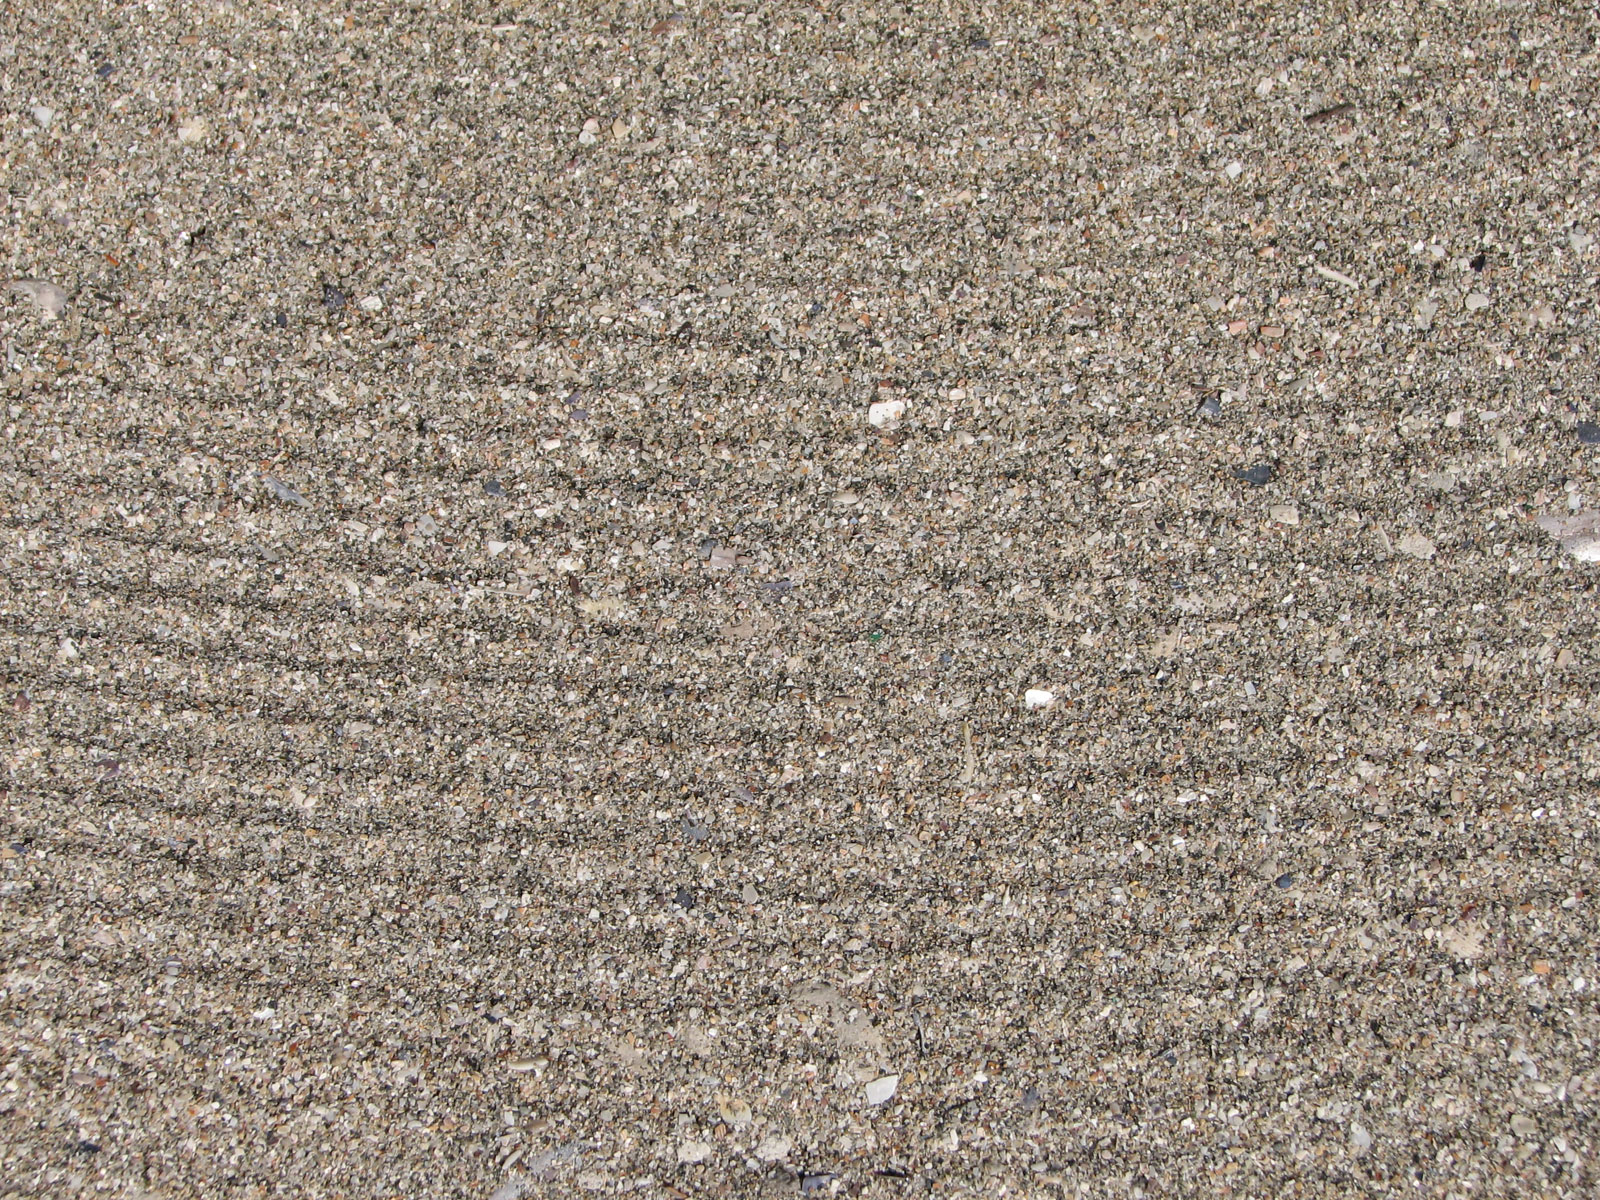 Sand-03 for 1600 x 1200 resolution